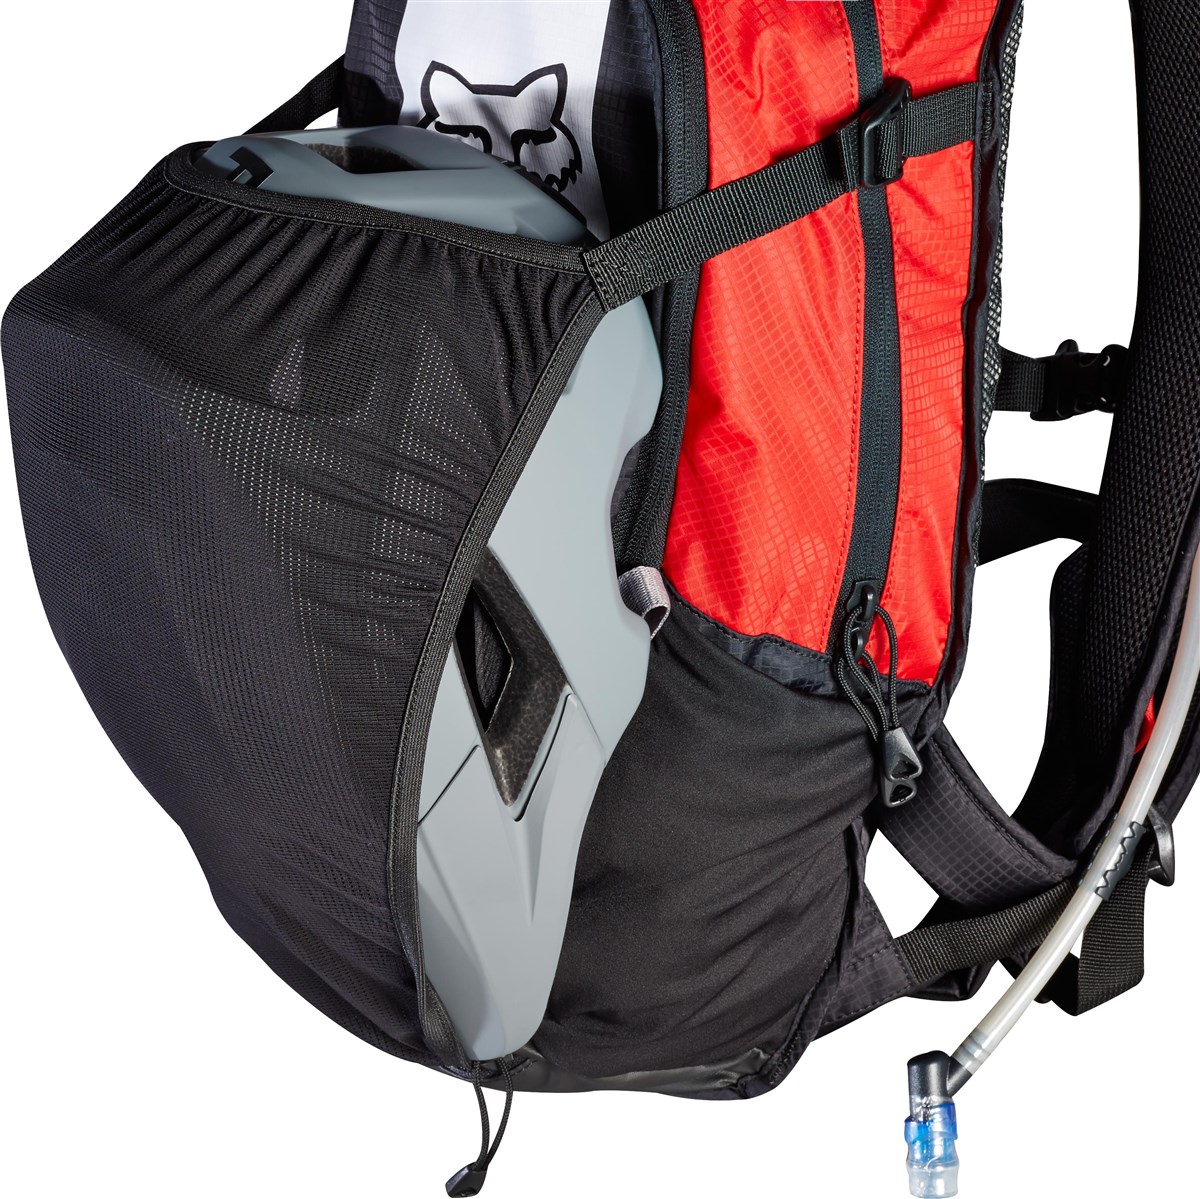 Fox Clothing Large Camber Race Hydration Pack / Backpack